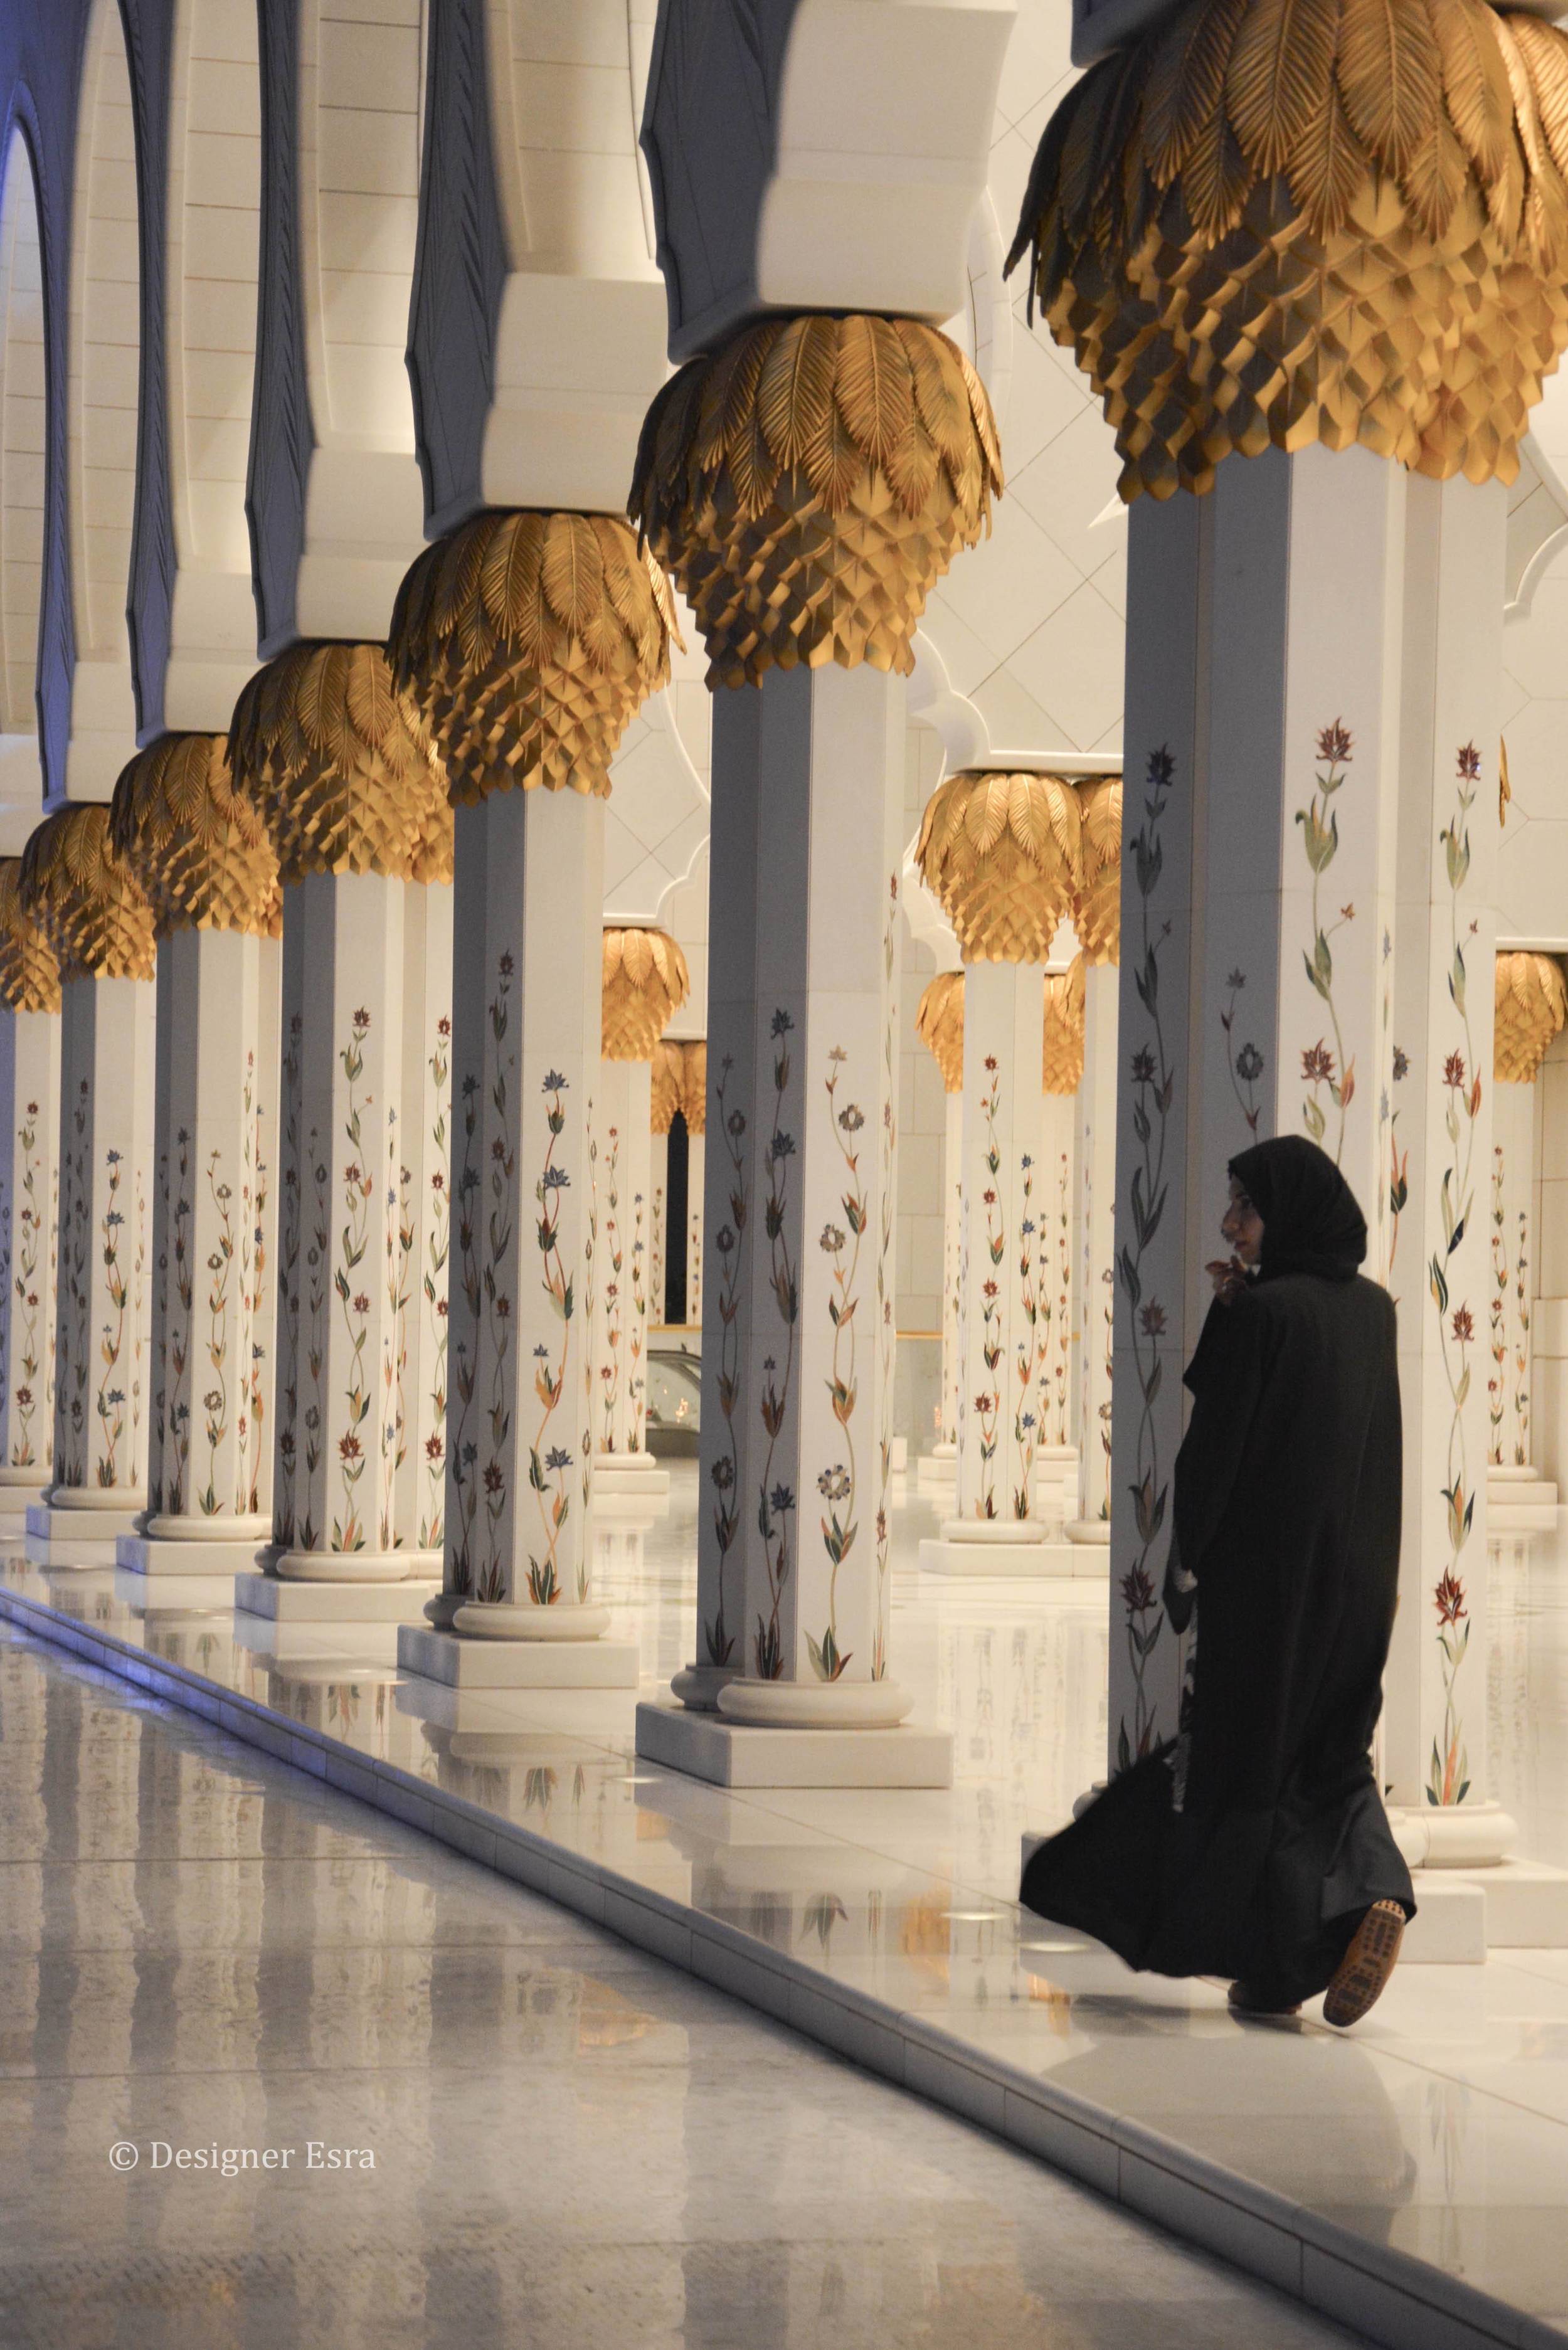 Floral Columns in Sheikh Zayed Grand Mosque 